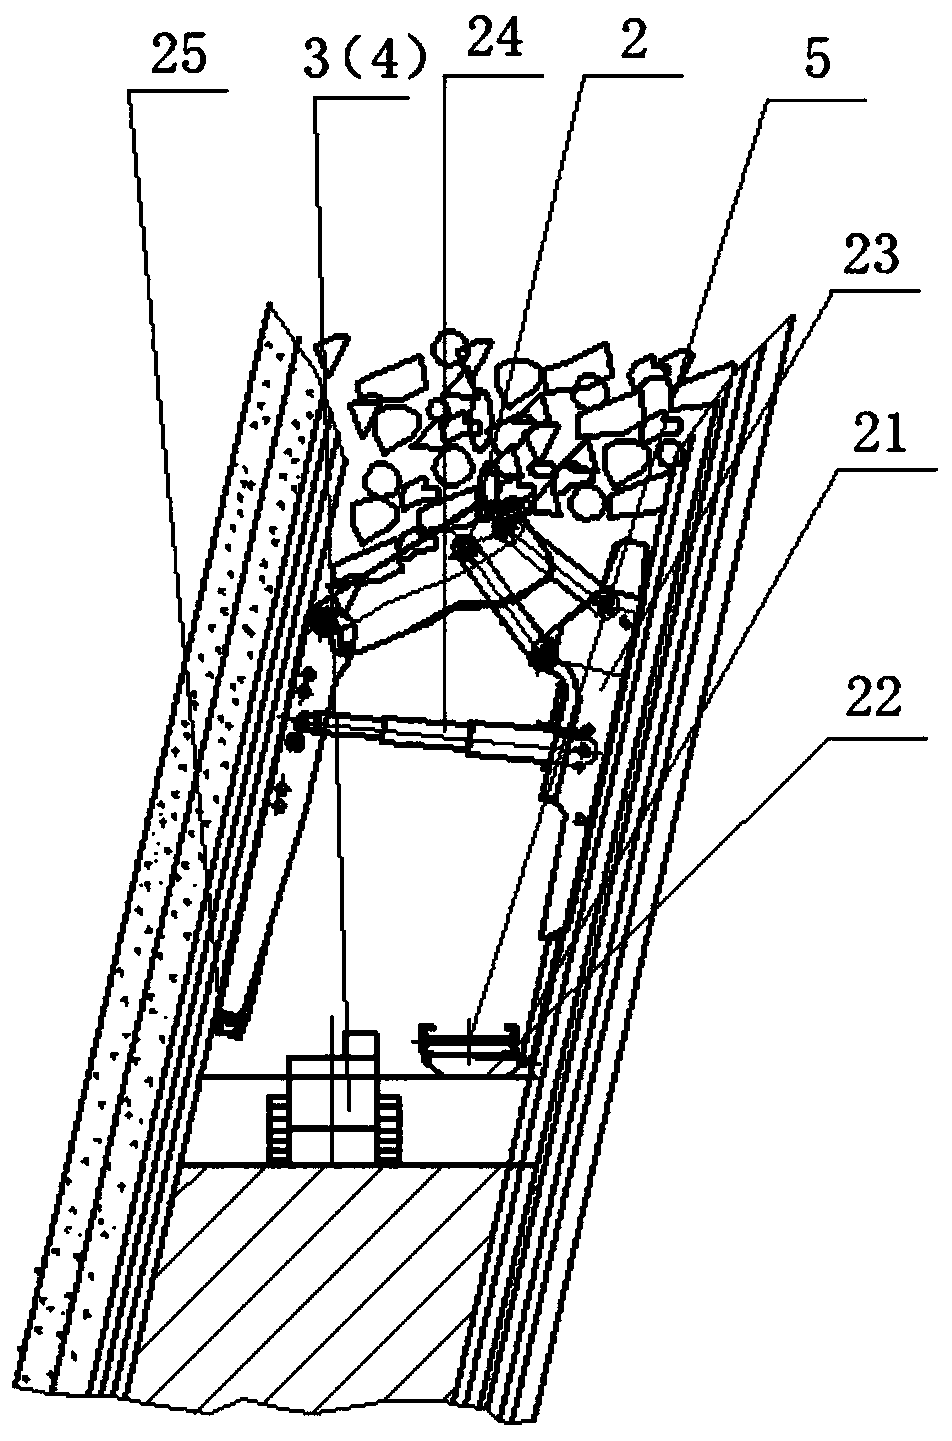 Mechanized Coal Mining System and Coal Mining Method in Steeply Inclined Thick Coal Seam